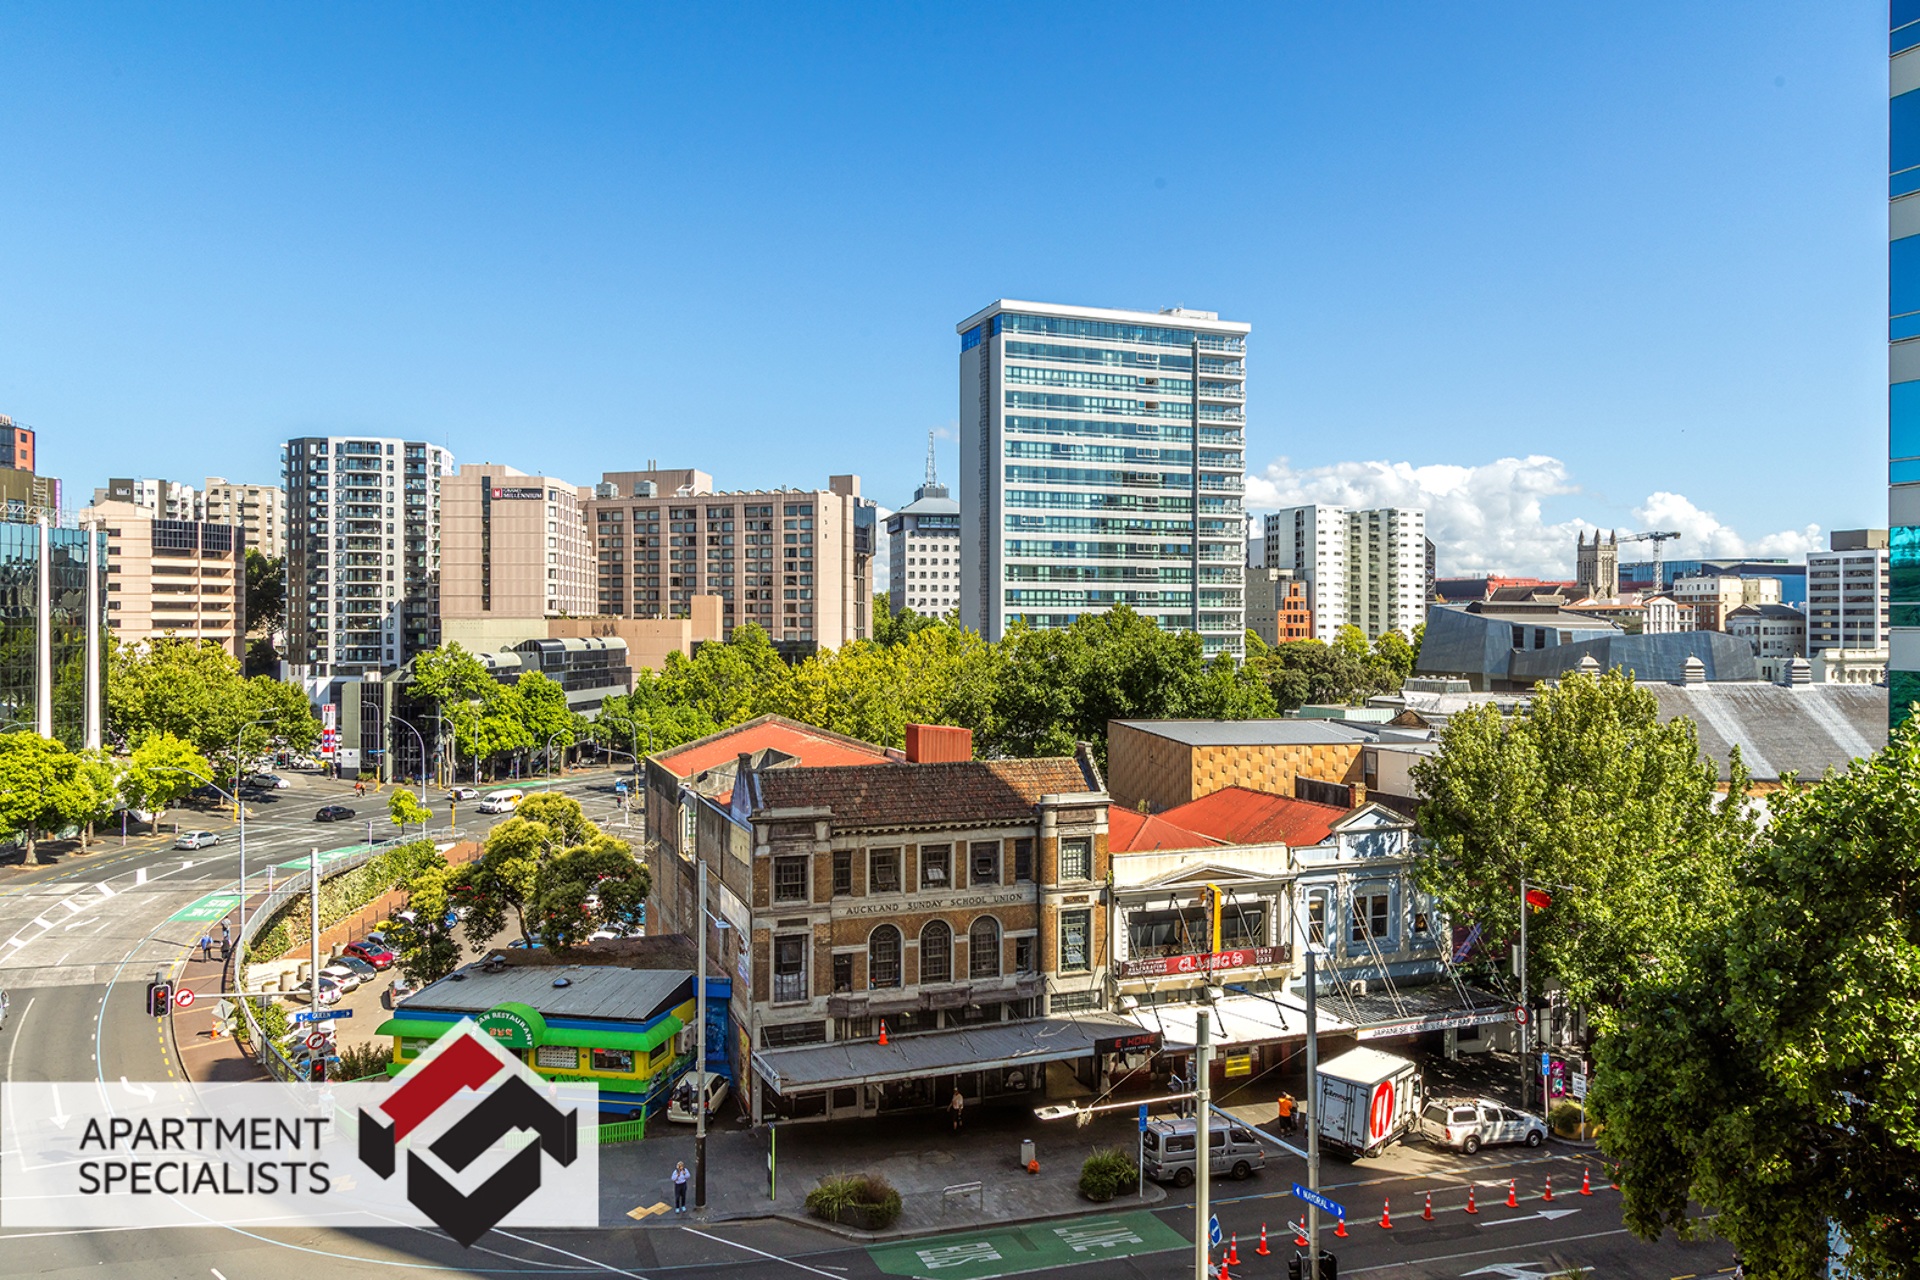 7 | 430 Queen Street, City Centre | Apartment Specialists